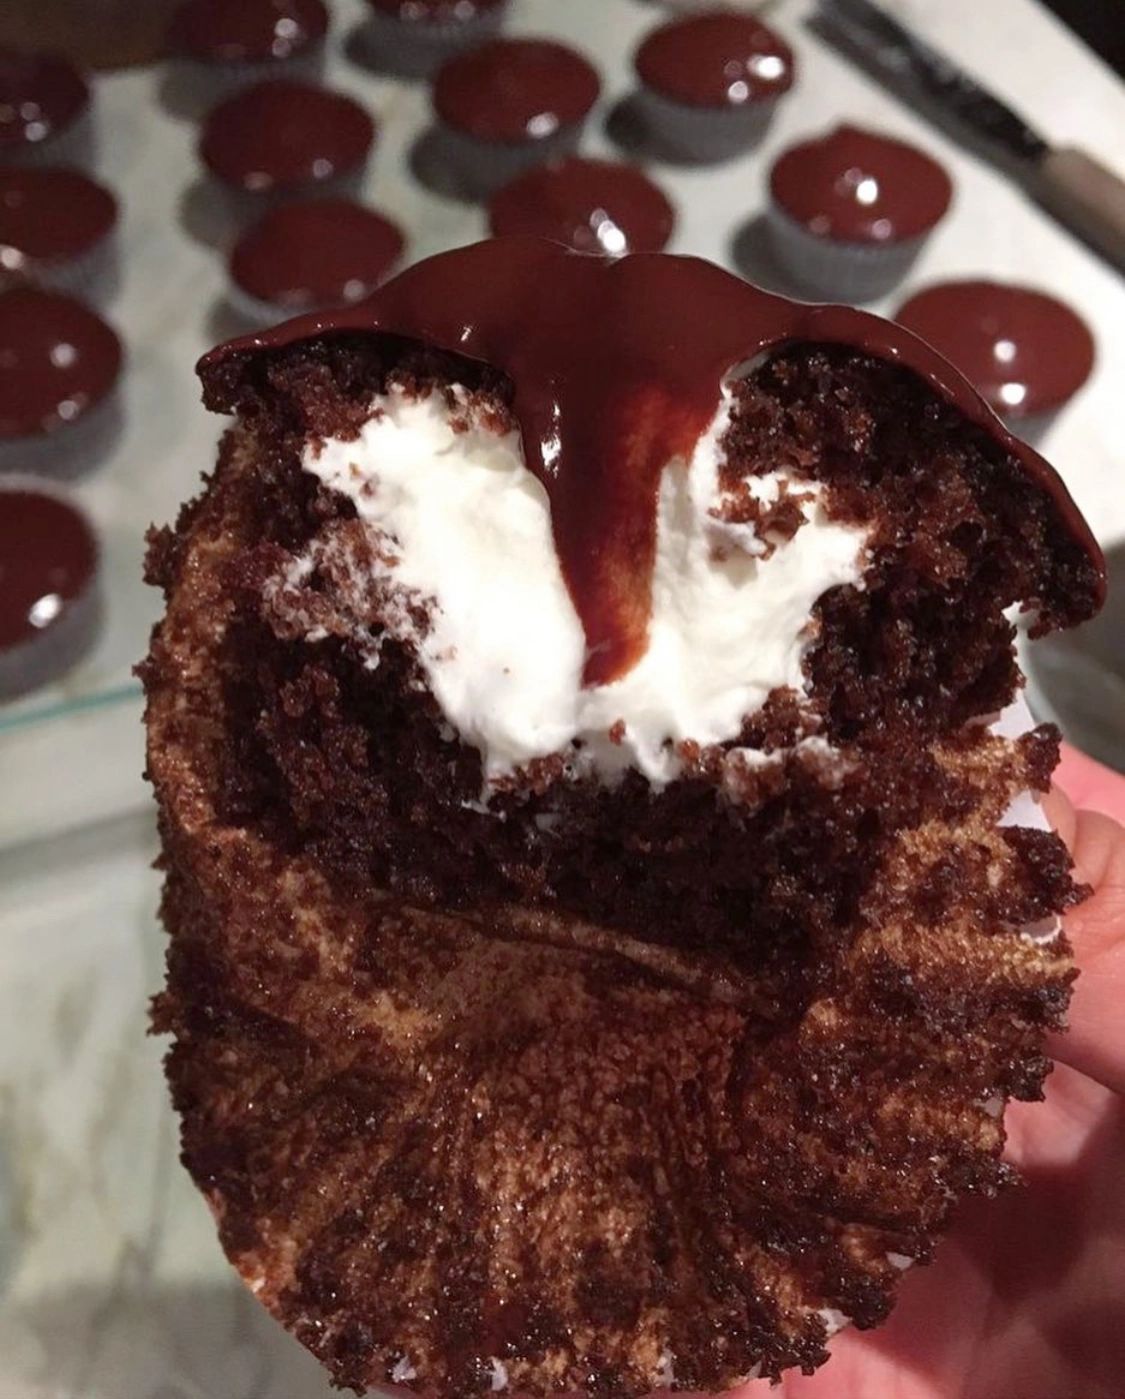 Chocolate ganache cupcake filled with whipped cream